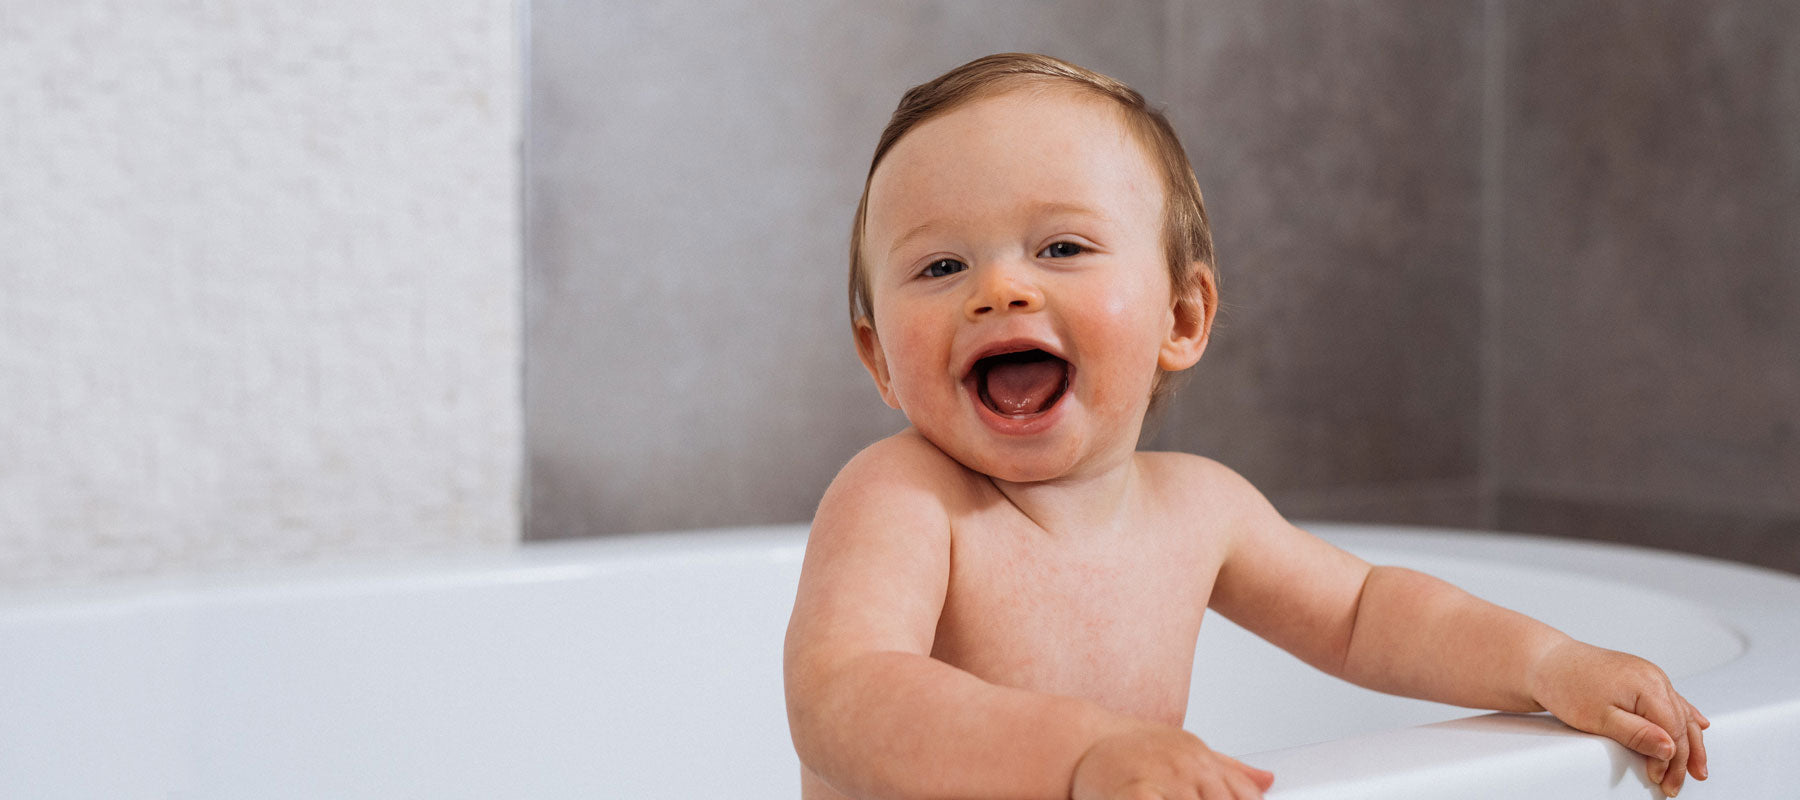 baby boy laughing and smiling in the bath